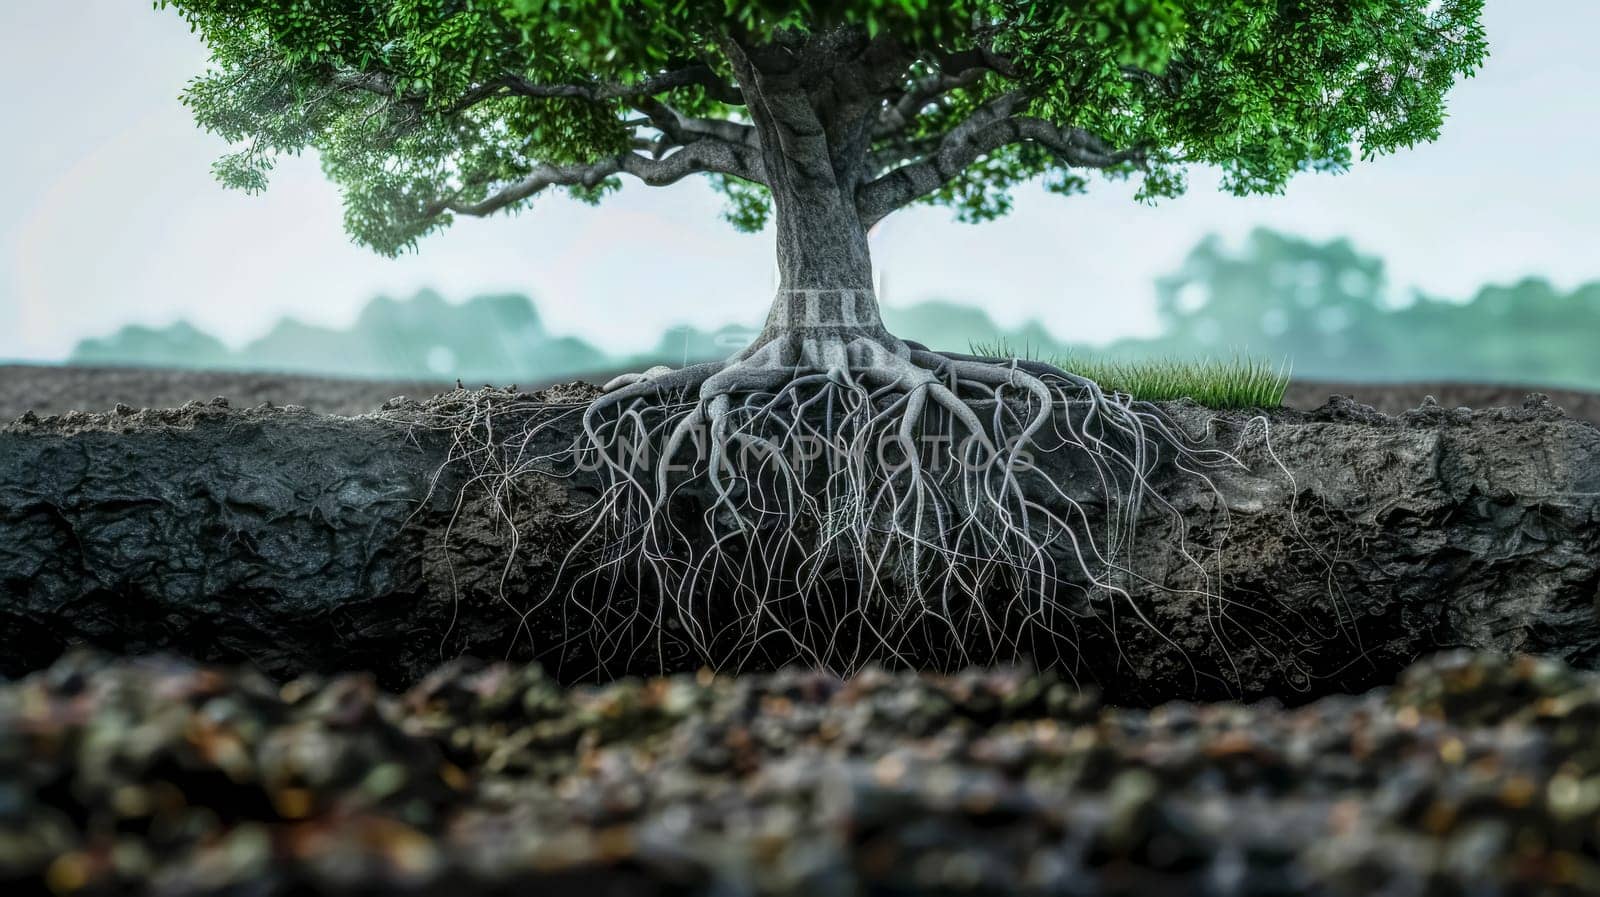 Powerful image showcasing a tree's intricate root system above ground